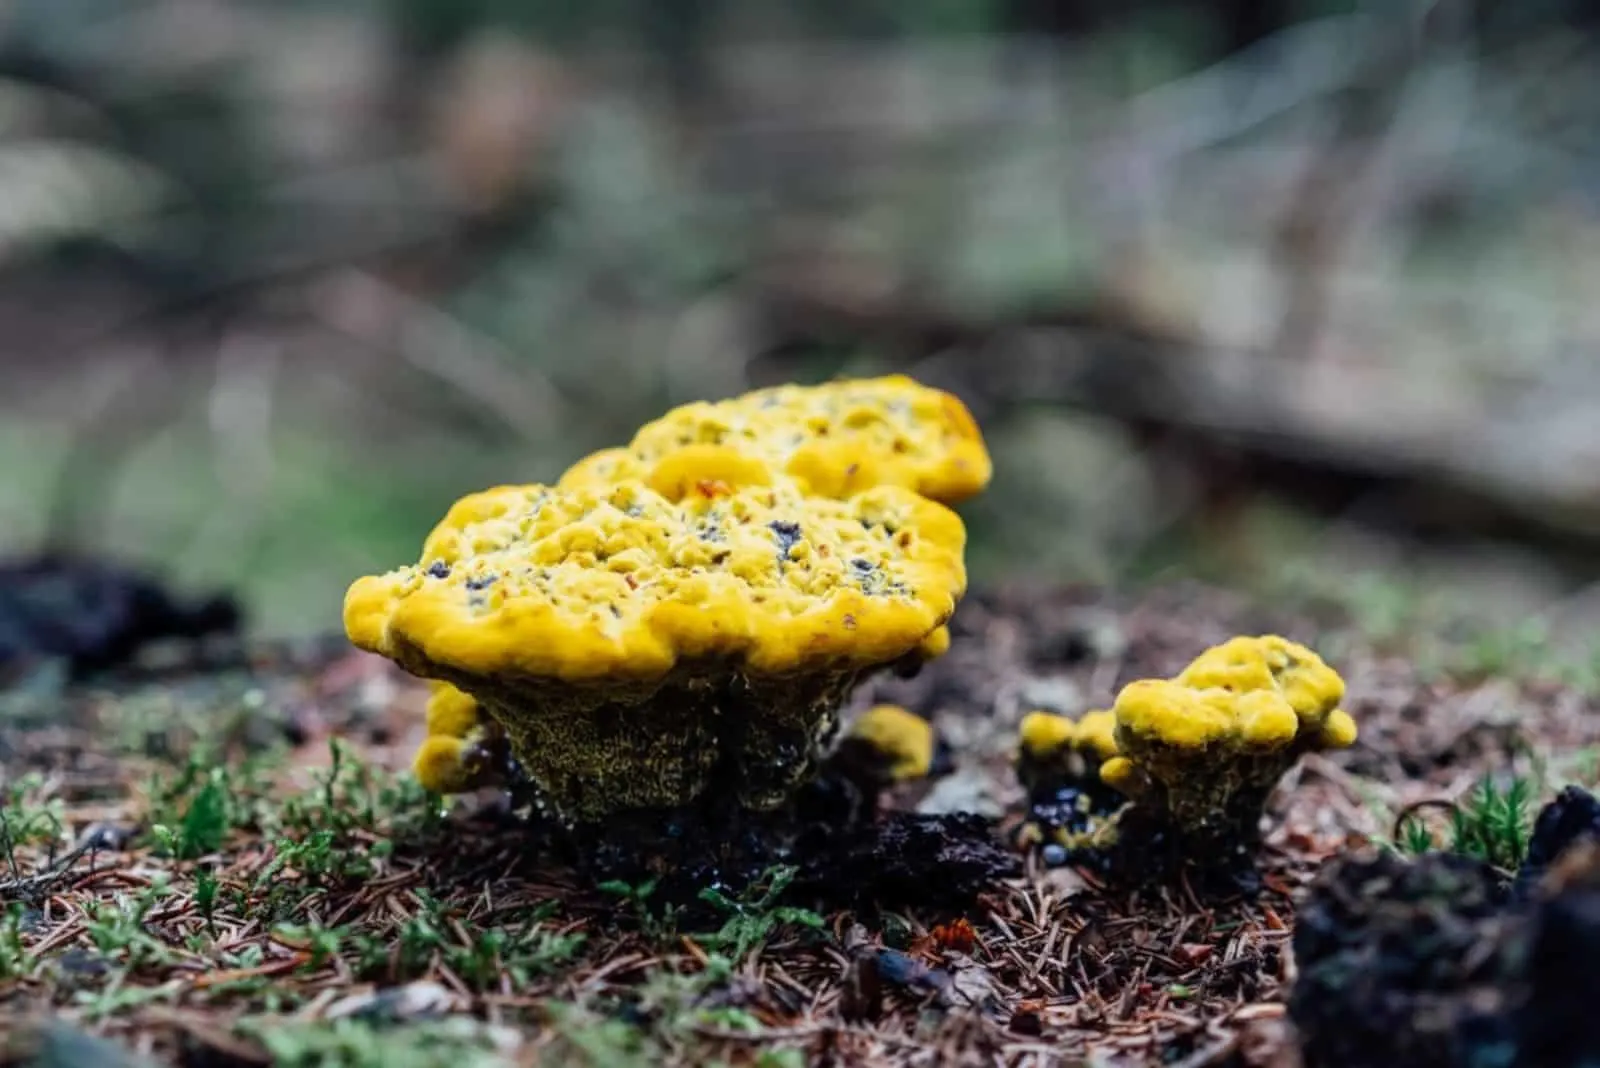  yellow fungus growing on trees stump in autumn forest